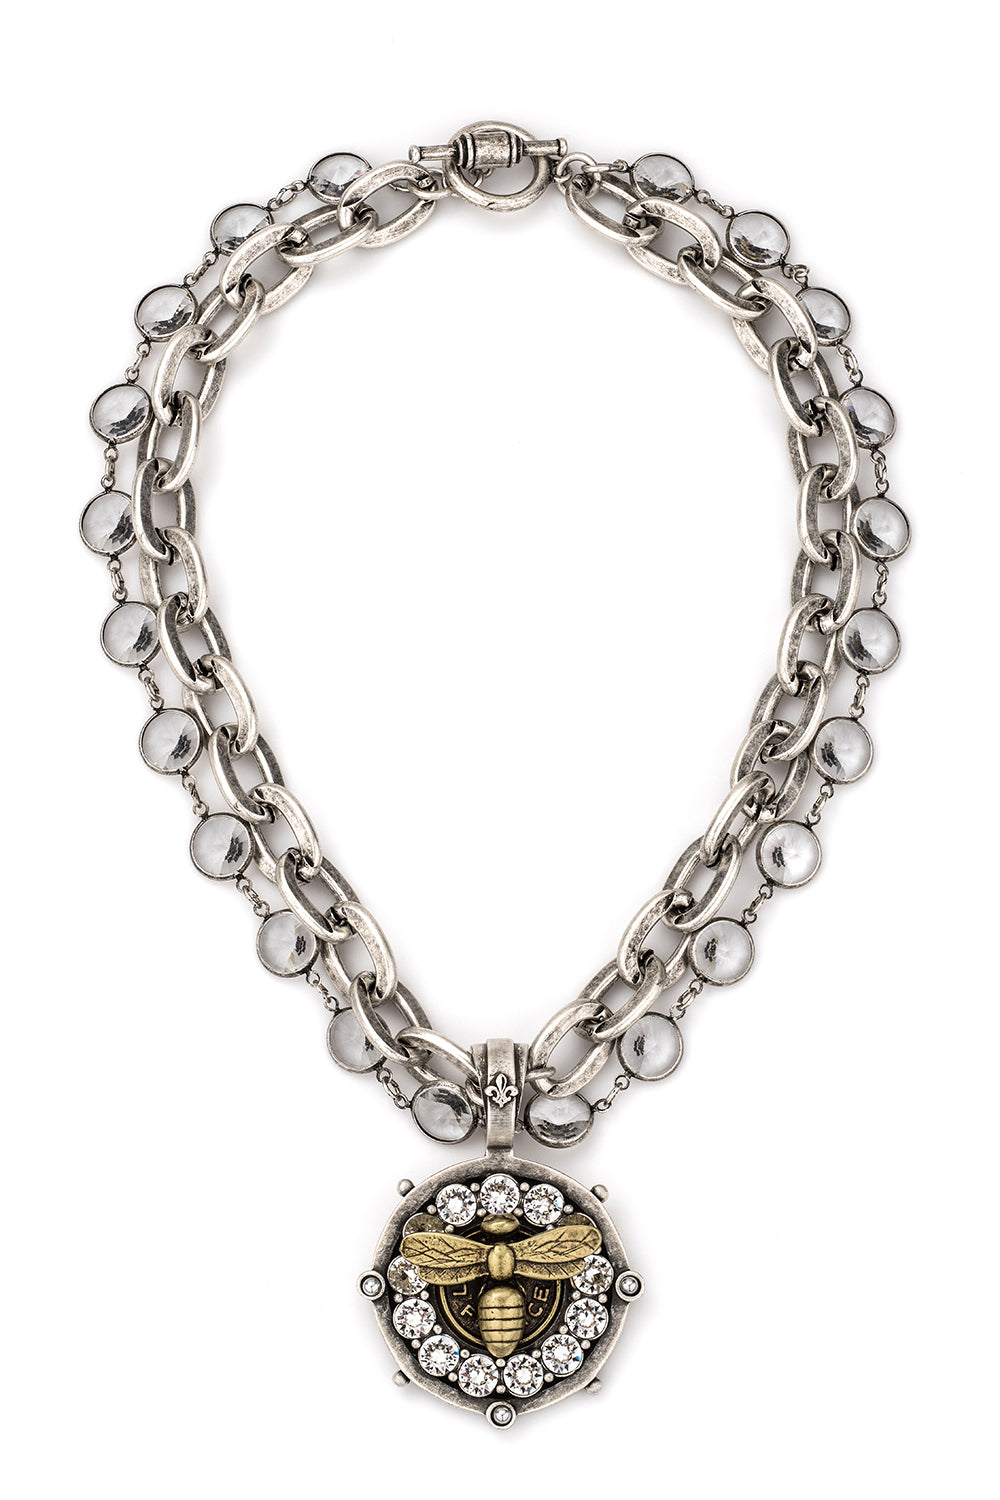 French Kande 2-Strand Austrian Crystal and Chain Necklace with Miel Medallion